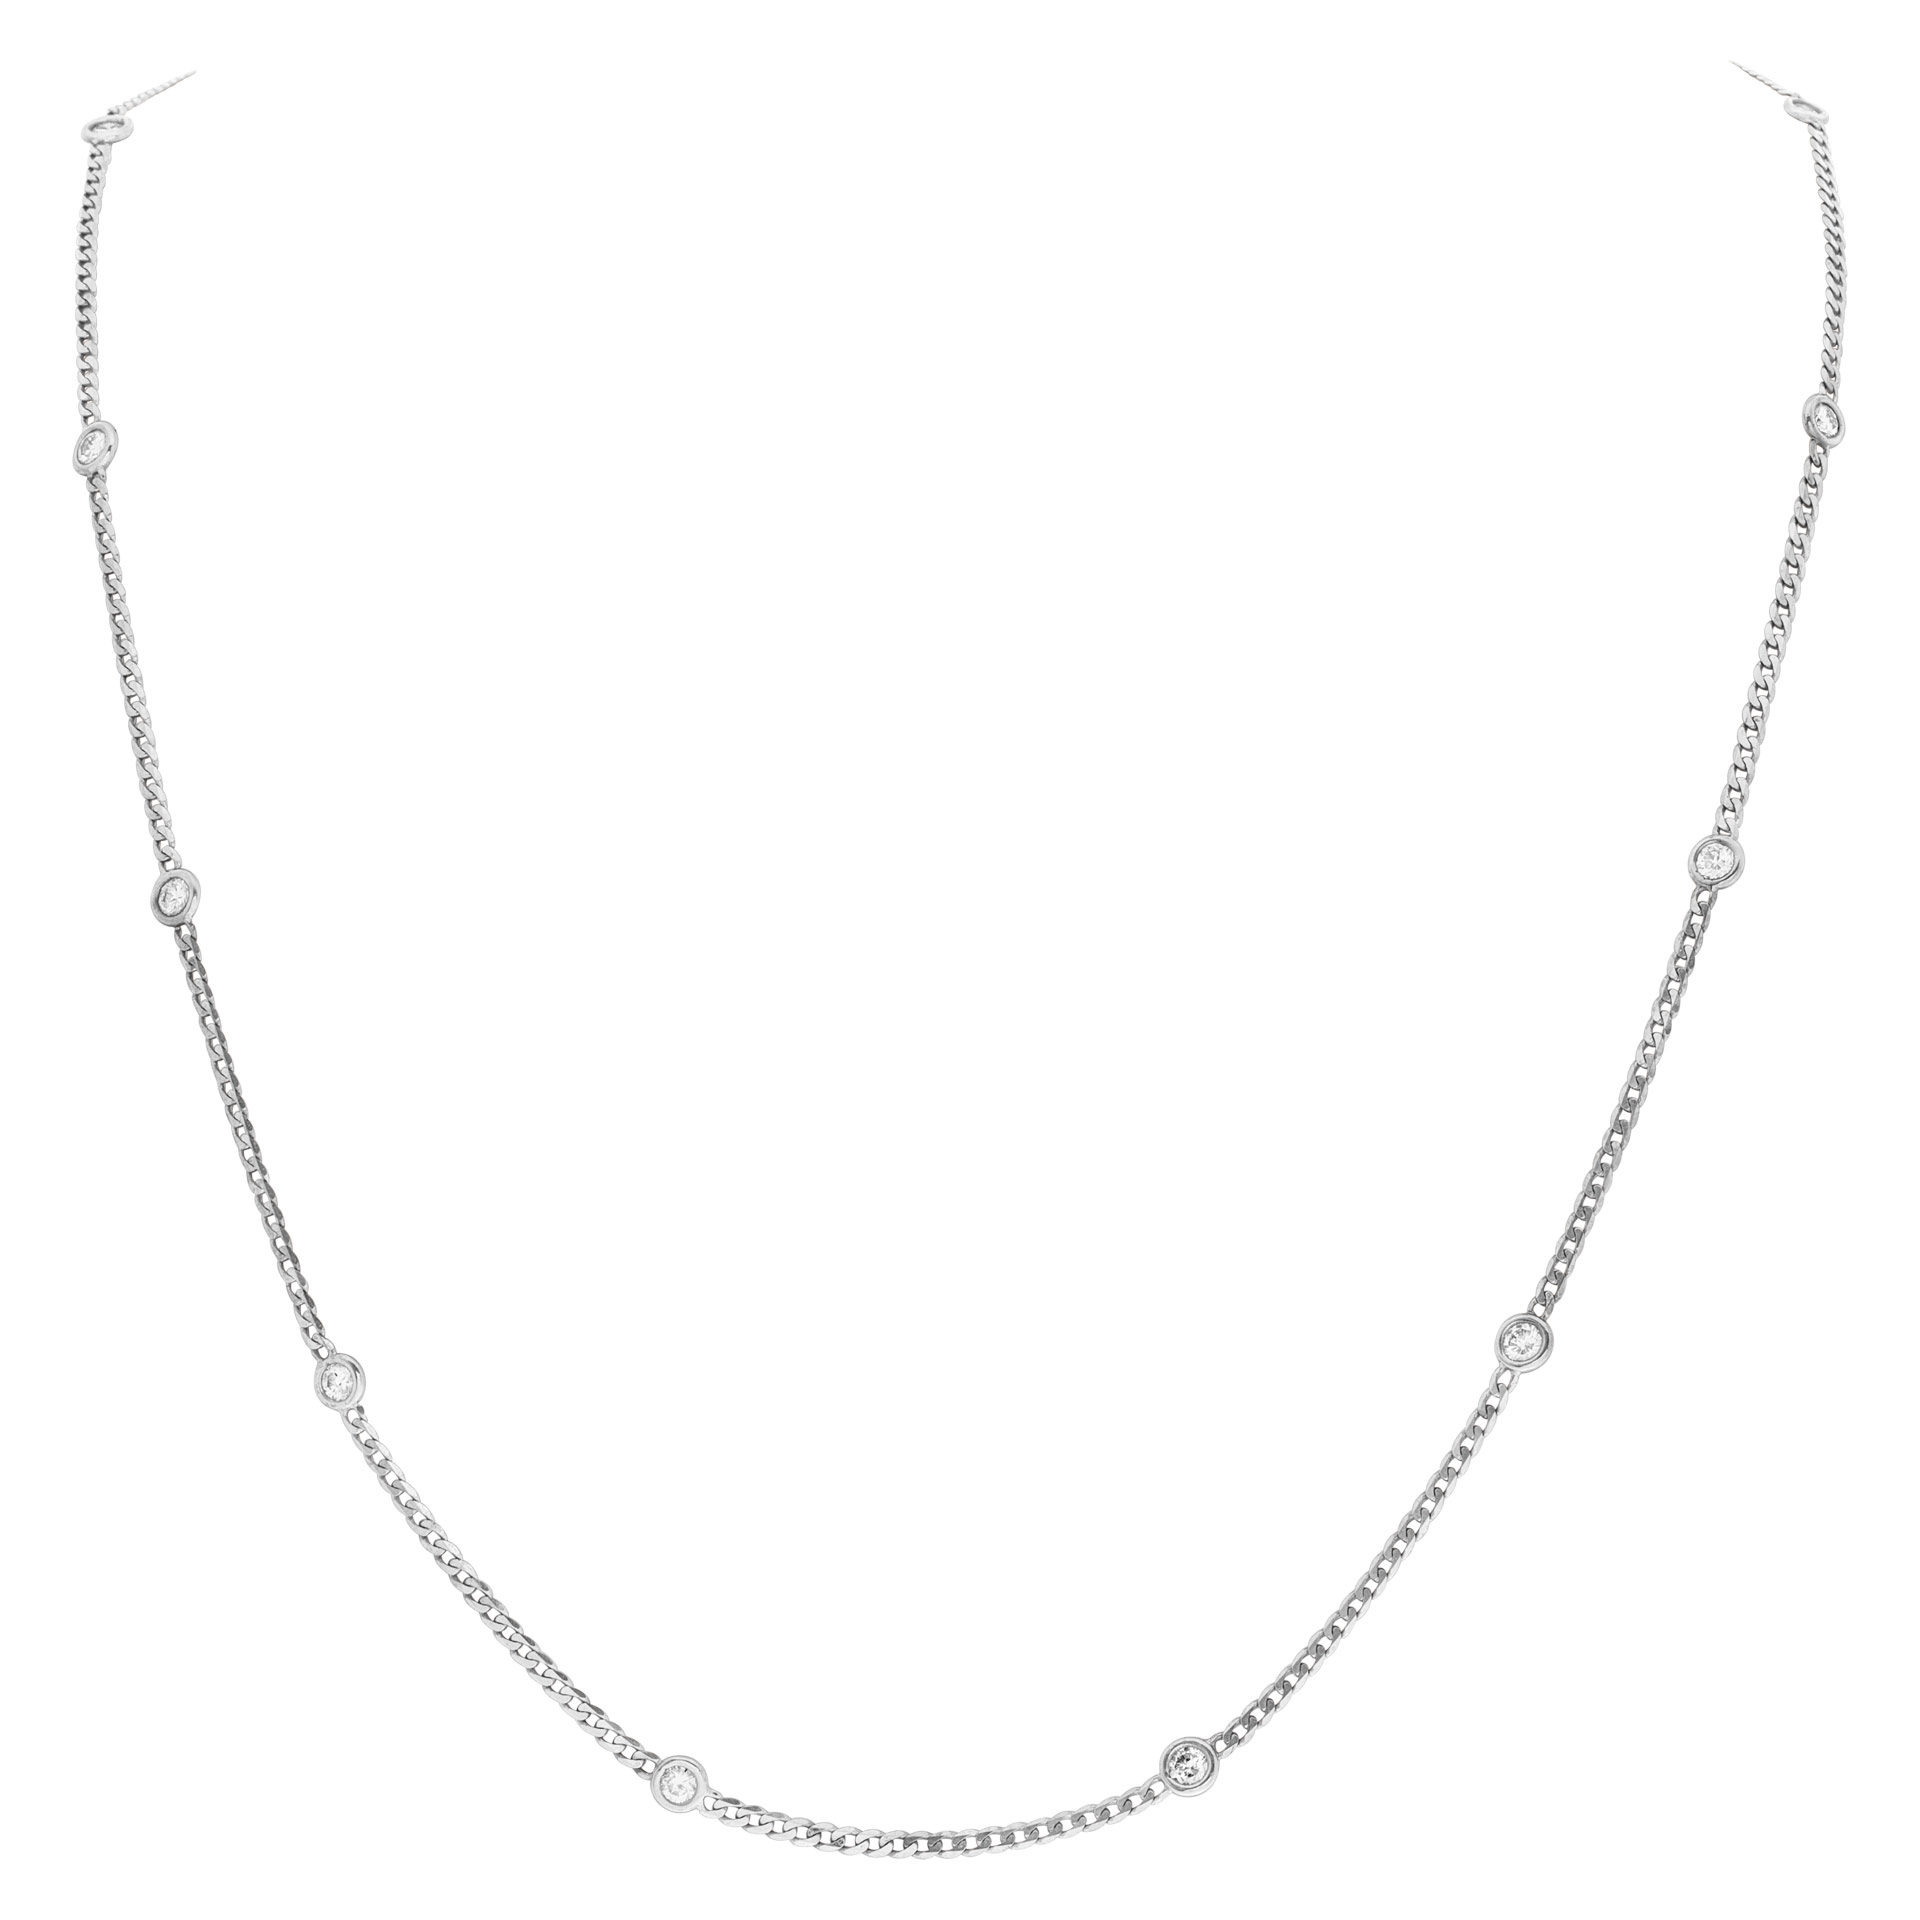 "Diamonds by the Yard" chain/necklace in 14k white gold. With 15 bezeled round brilliant cut diamonds, total approx. weight:1.66 carat. 24".